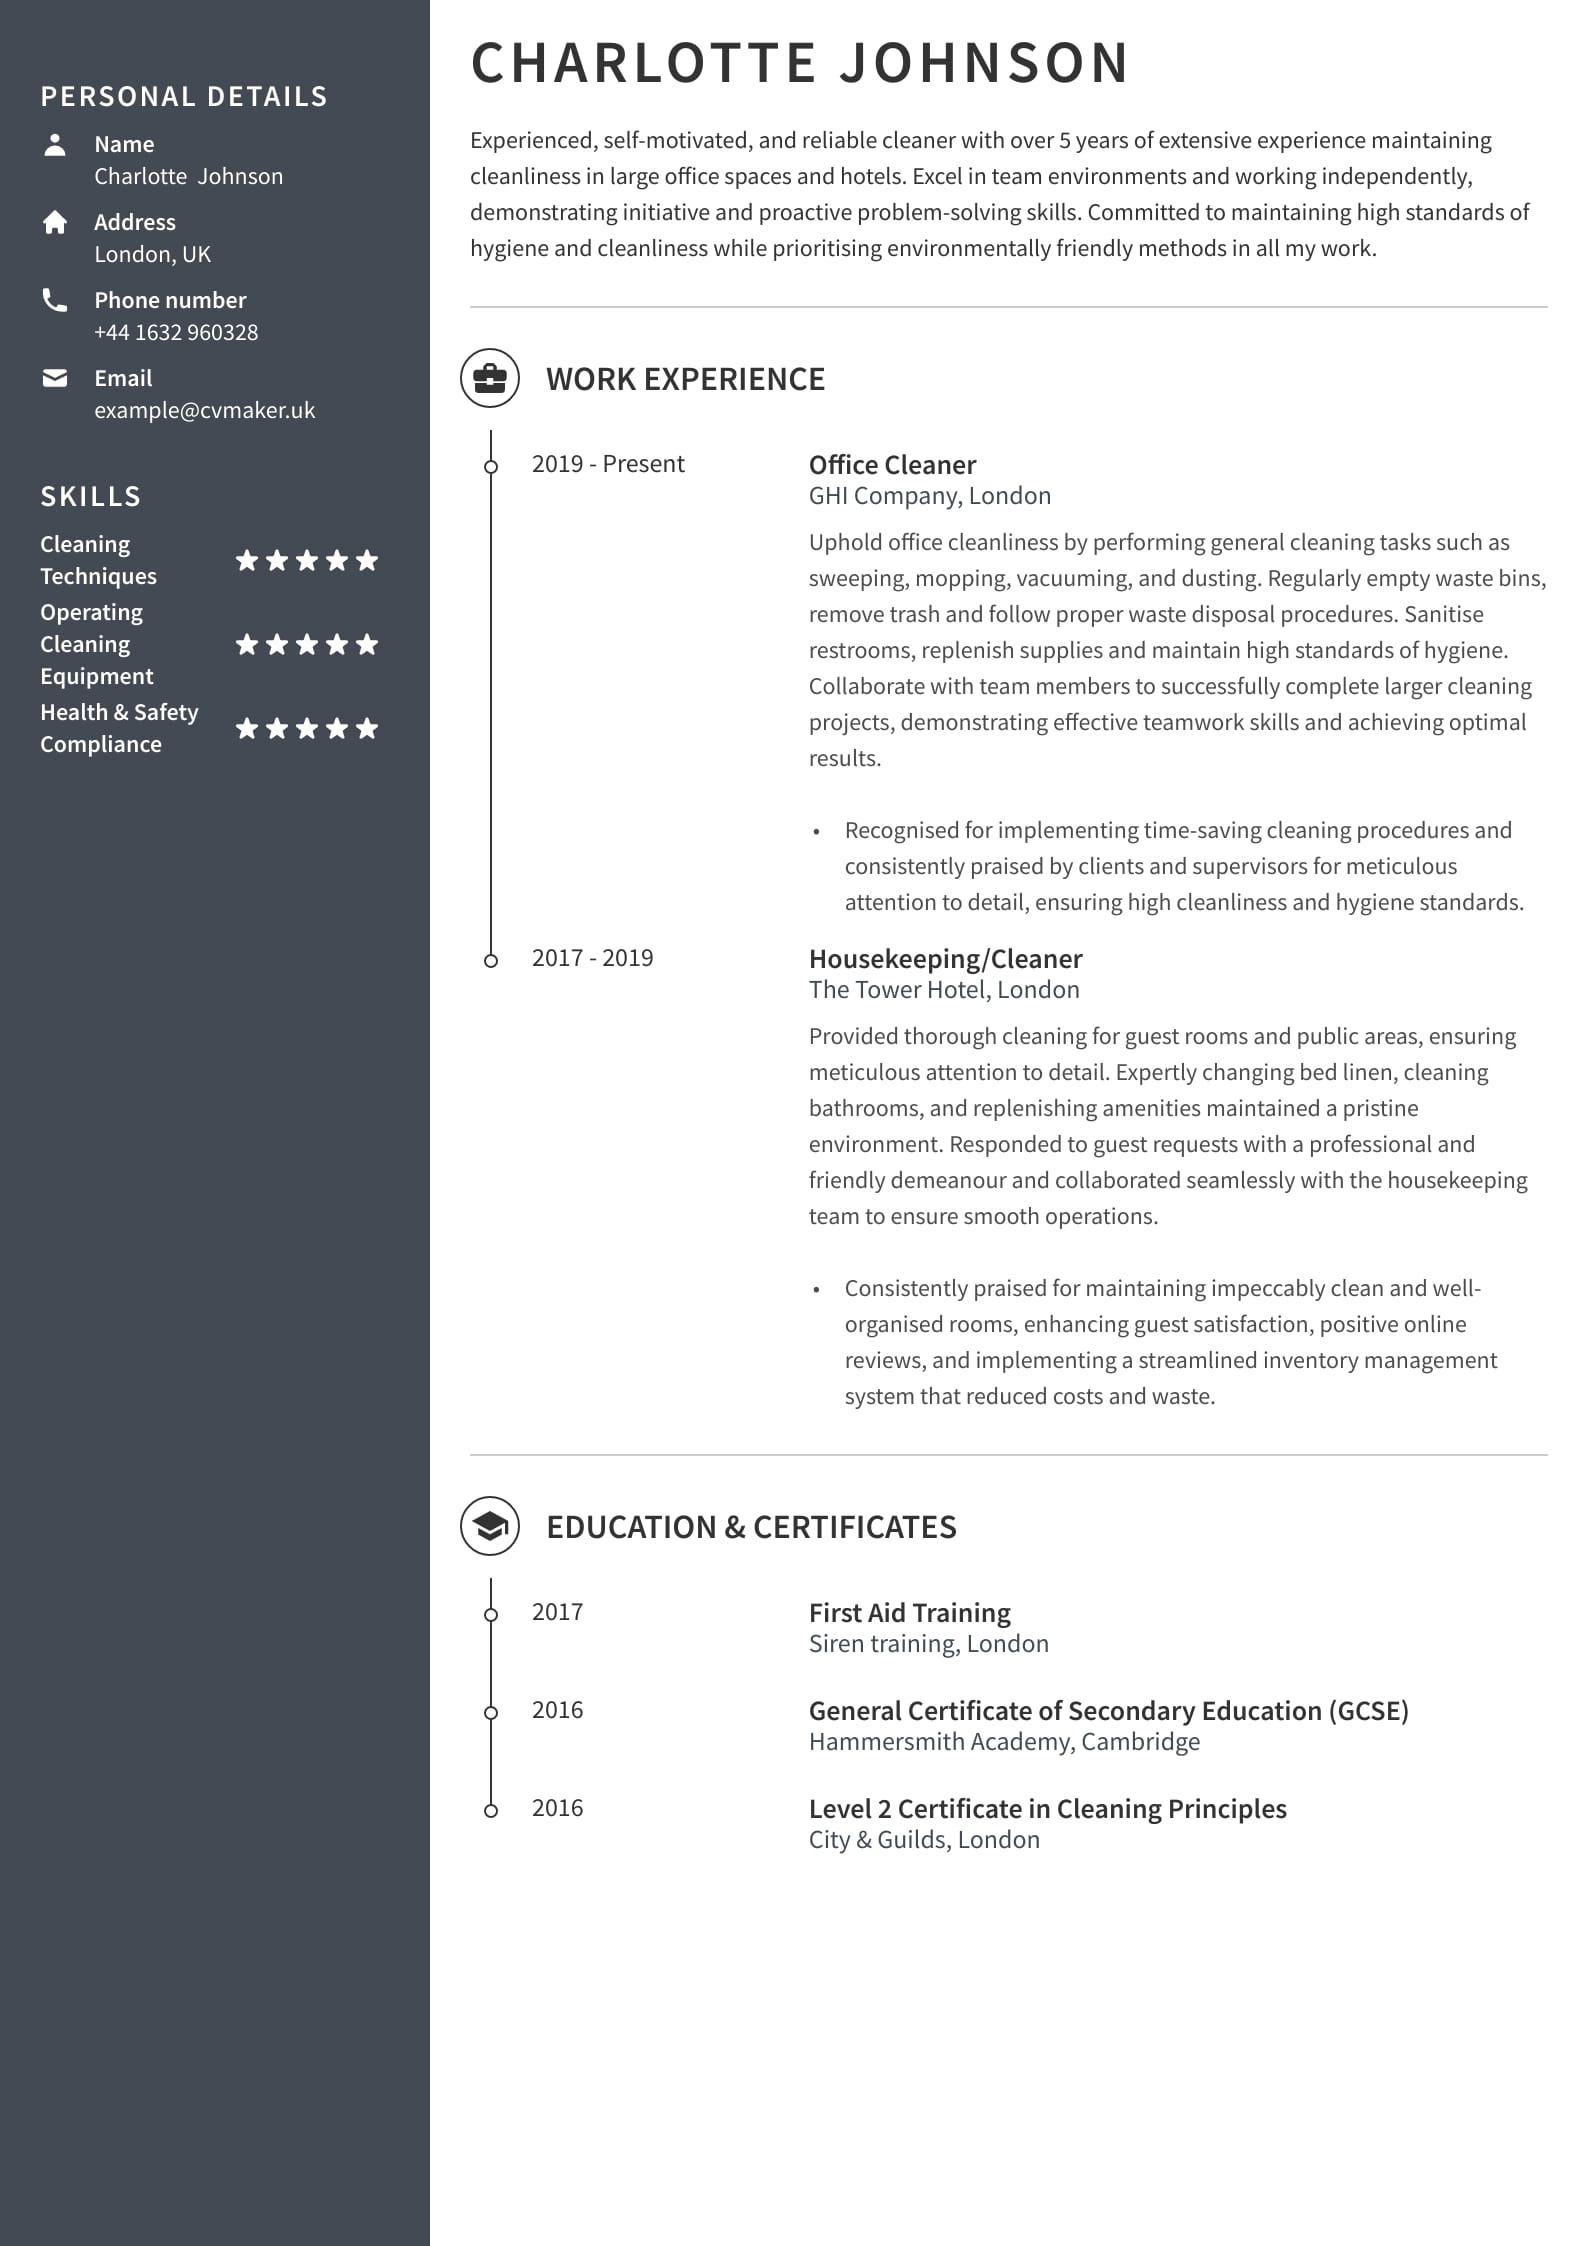 Cleaner CV example